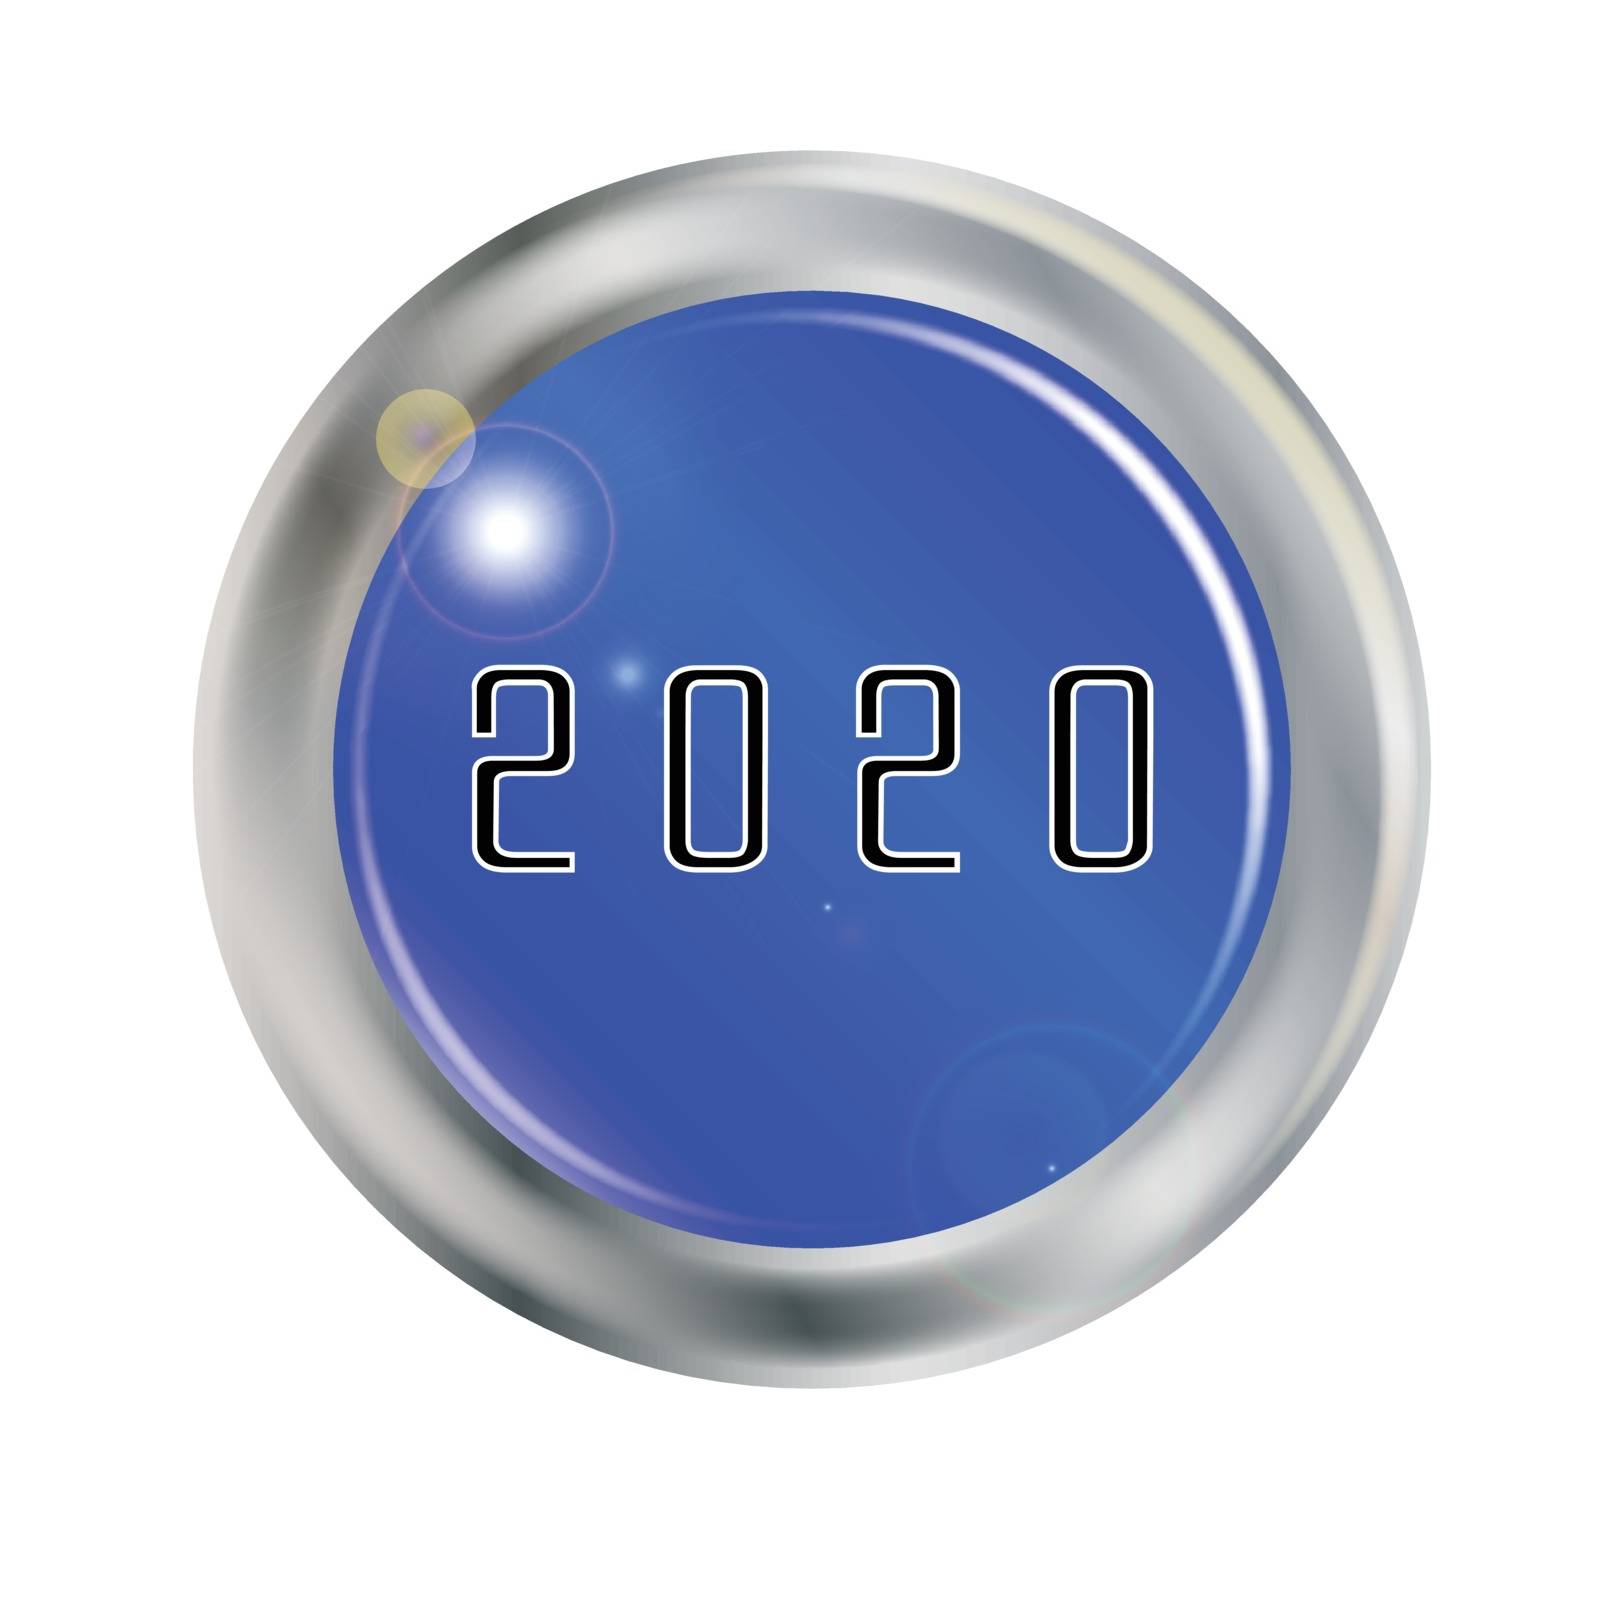 2020 Blue Button by Bigalbaloo